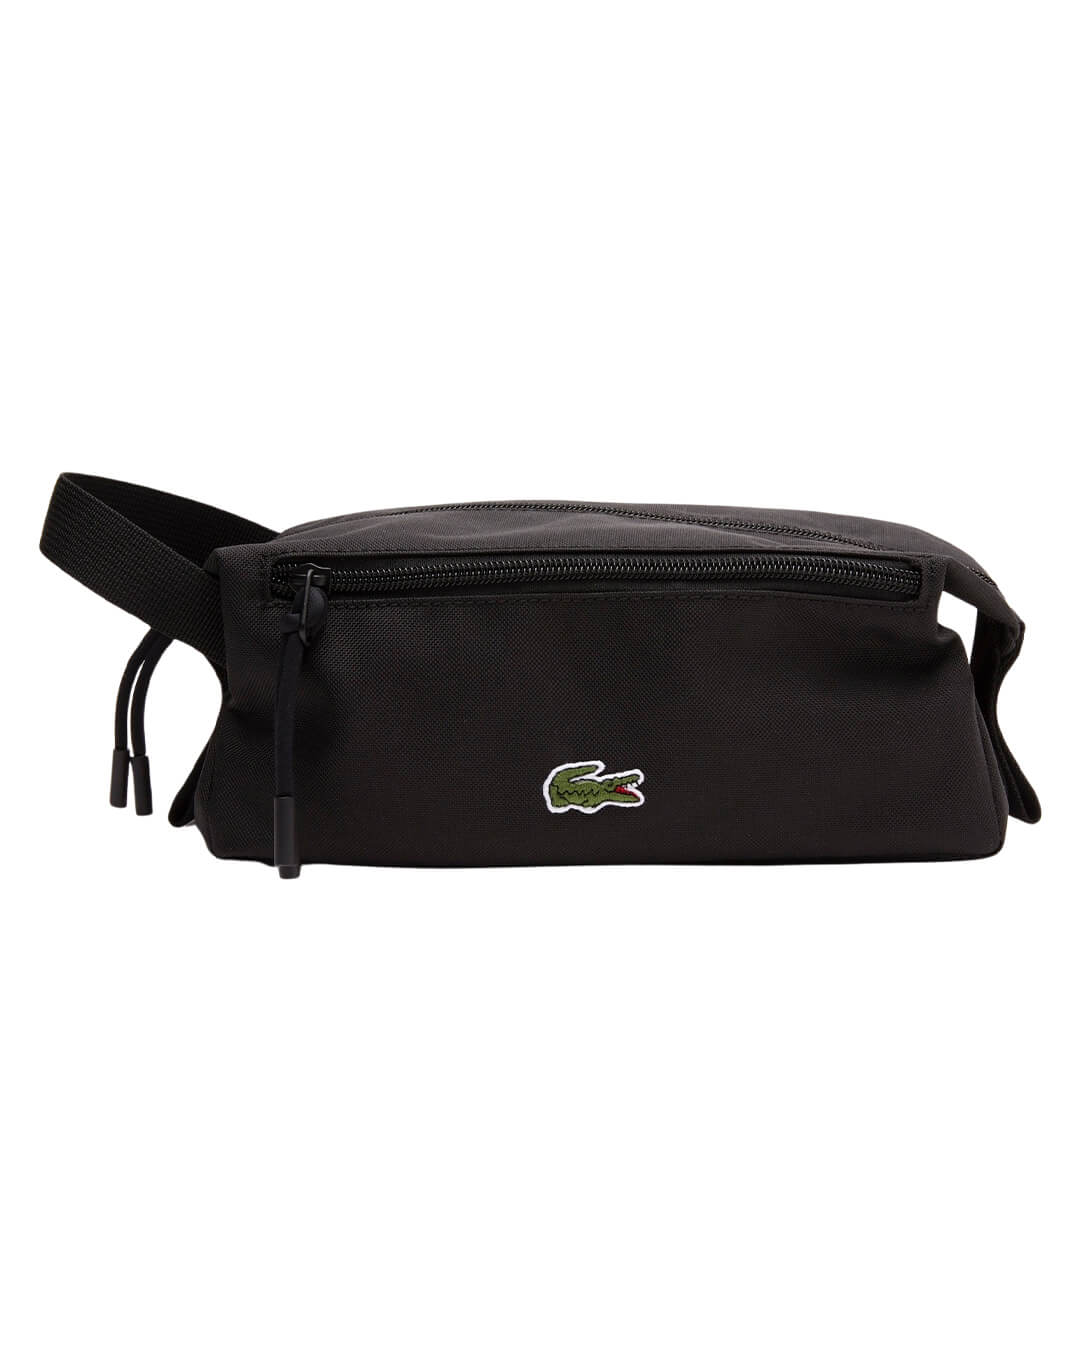 Lacoste Bags ONE Lacoste Black Unisex Zippered Toiletry Bag